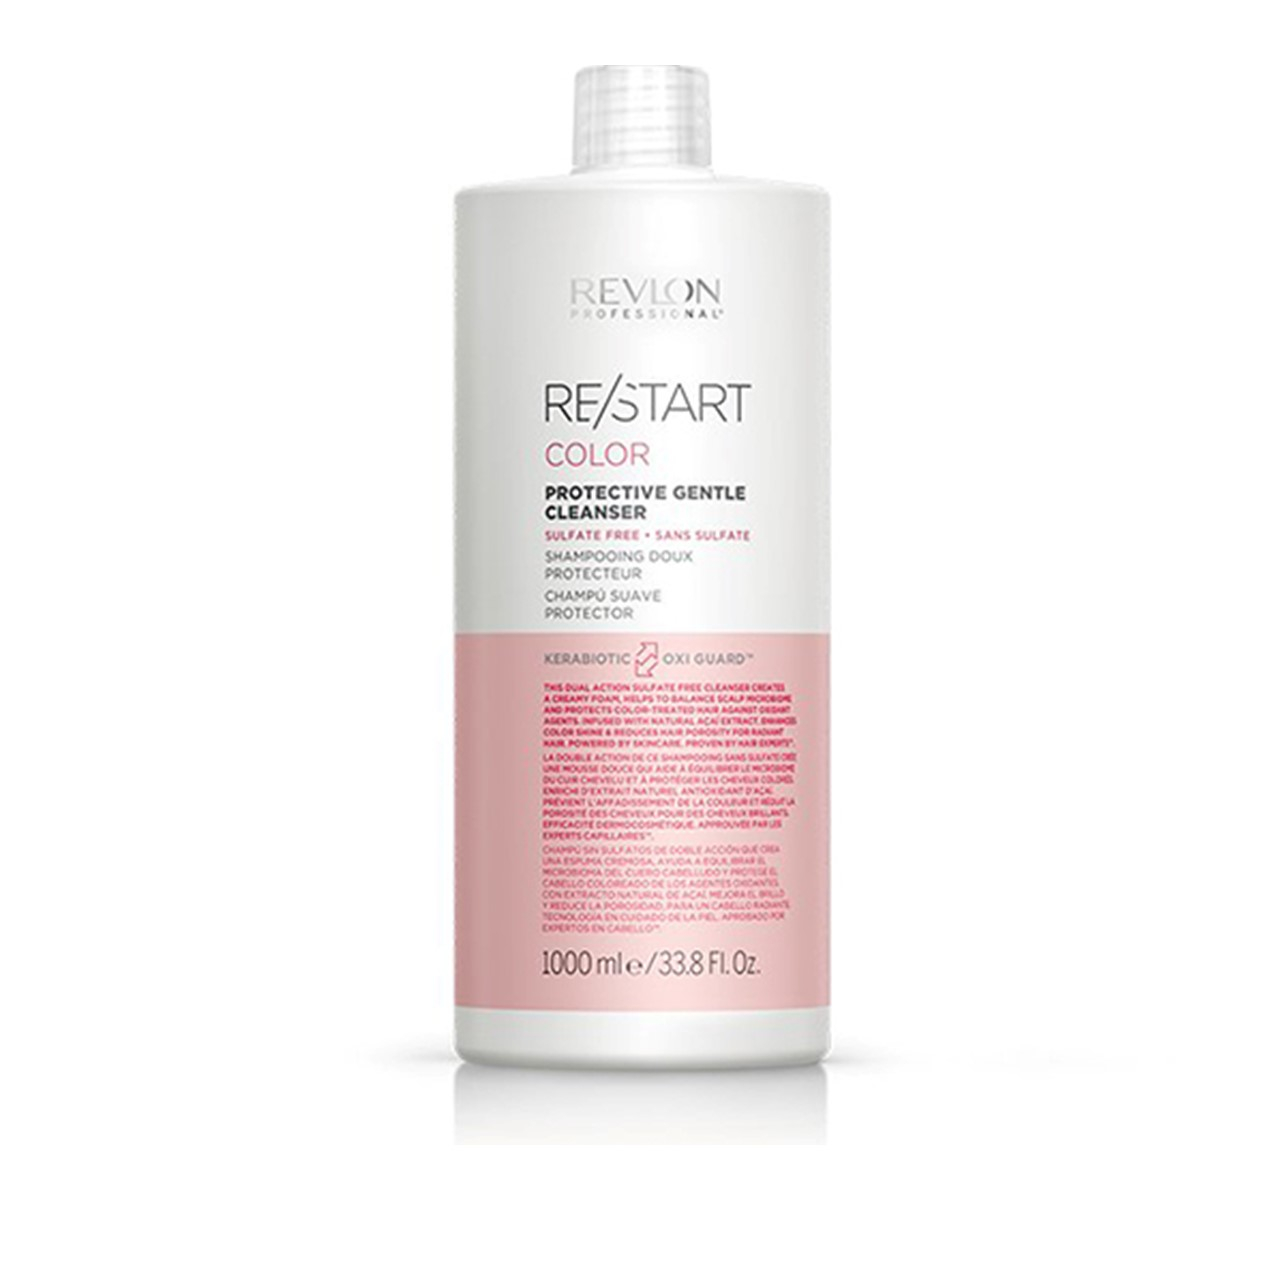 Buy Revlon Professional Re/Start Color Cleanser Protective Gentle Shampoo · USA